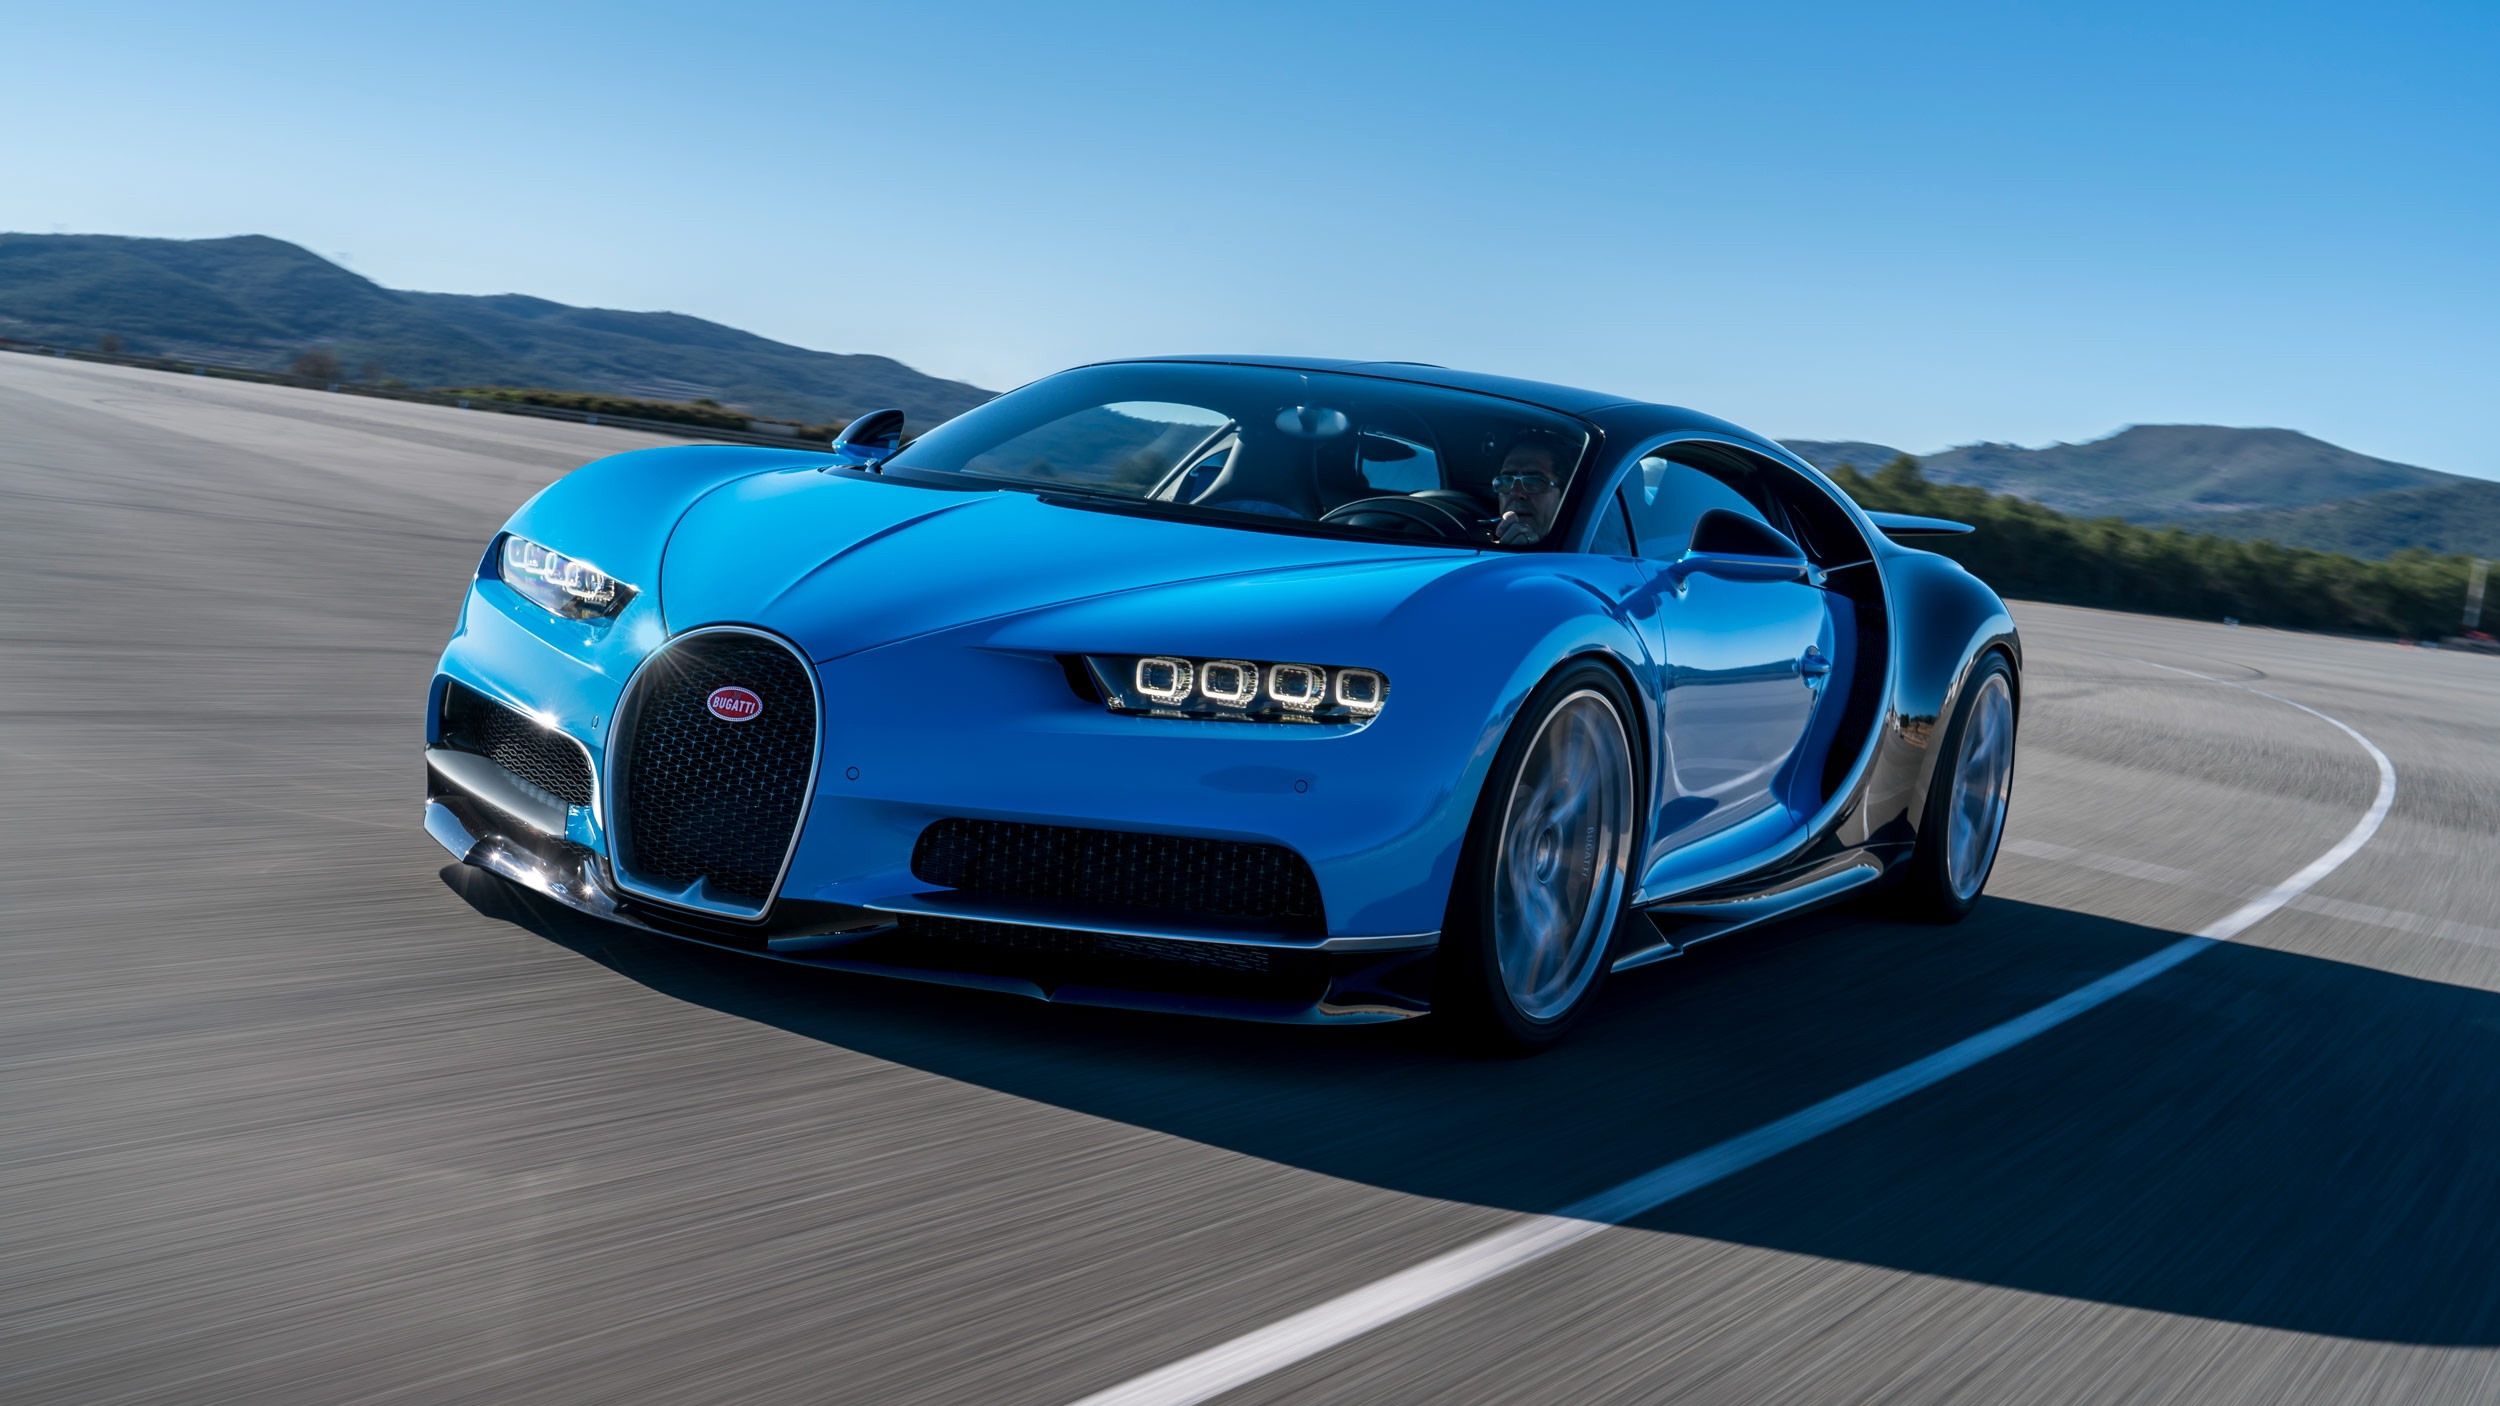 2019 Bugatti Test Driver Thinks The Chiron Can Reach A Top Speed Of 280 MPH